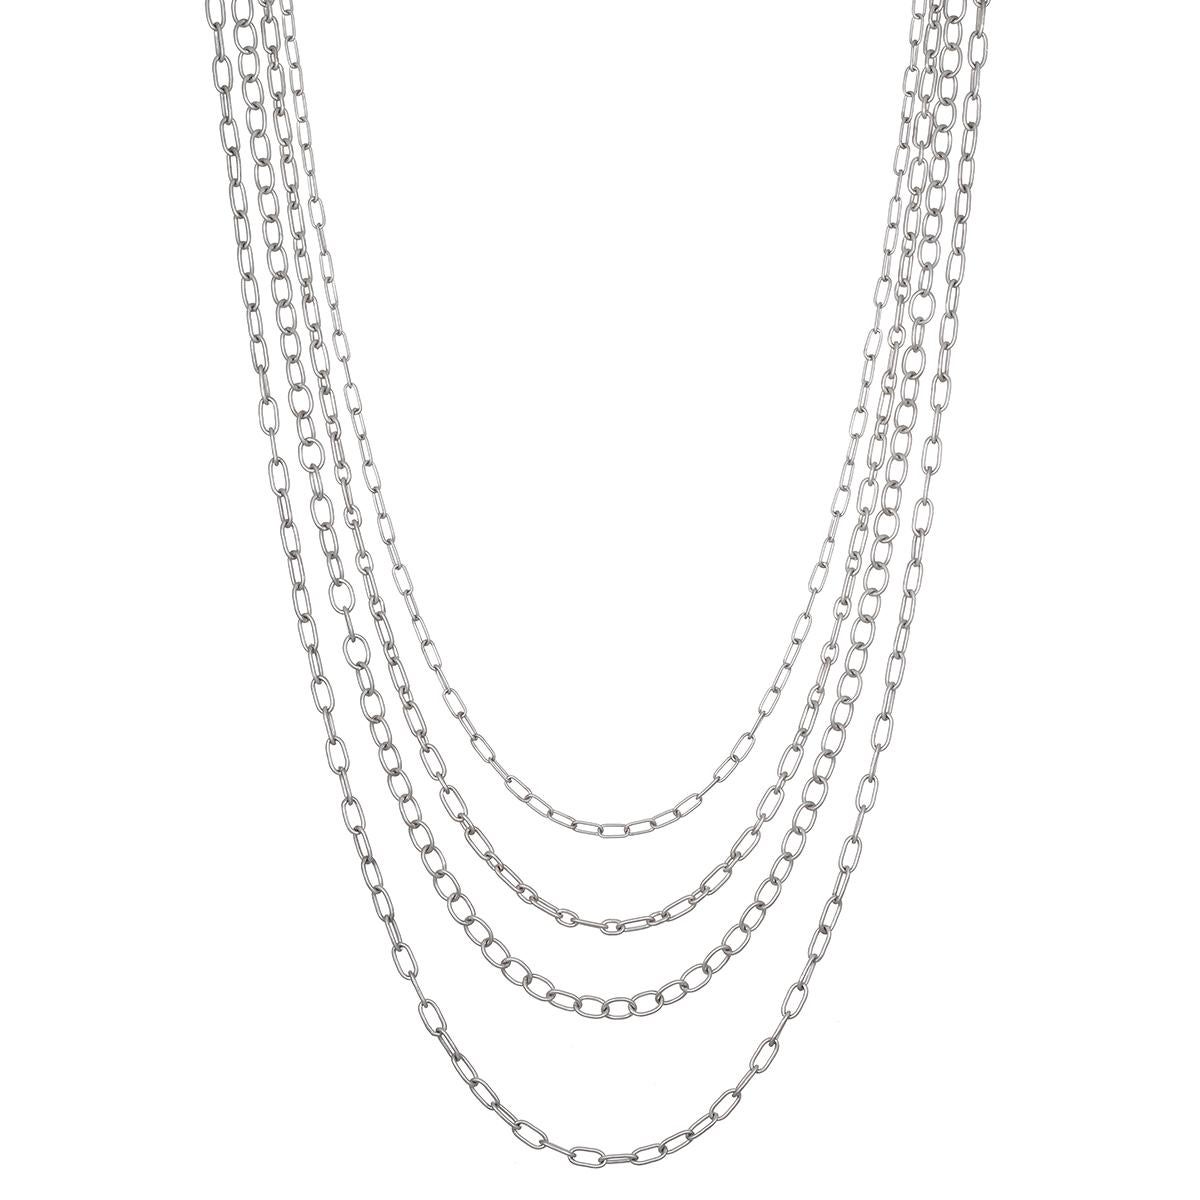 Experience everyday luxury in Faye Kim's Platinum Mini Paperclip Vintage Link Chain. Completely versatile - the links allow for a variety of adjustable lengths and styles.  Wear it long, short, doubled and layered, with or without a pendant!

Length